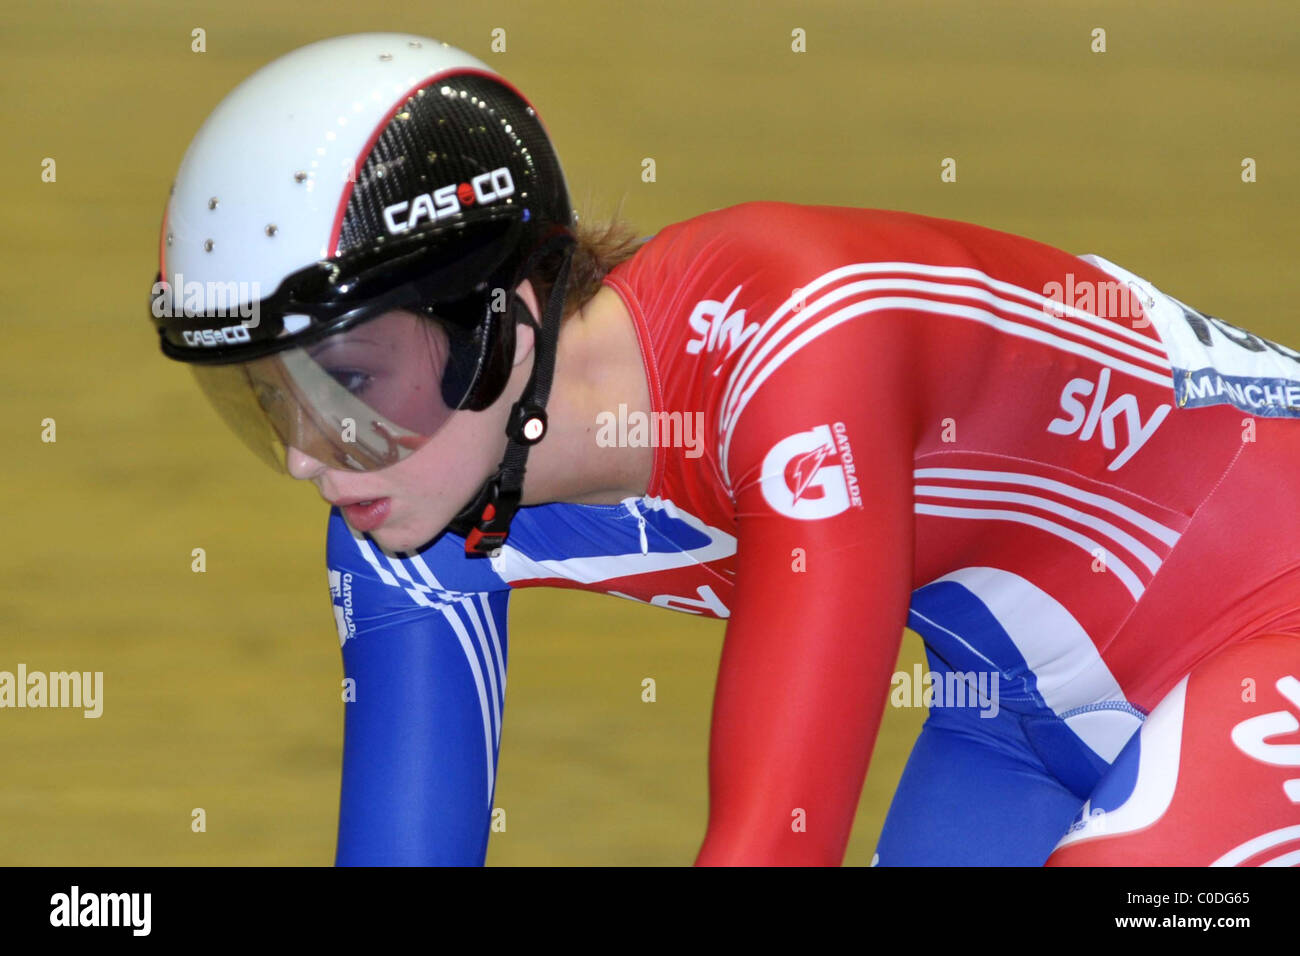 Womens Sprint. UCI Manchester Velodrome ciclismo, Foto Stock